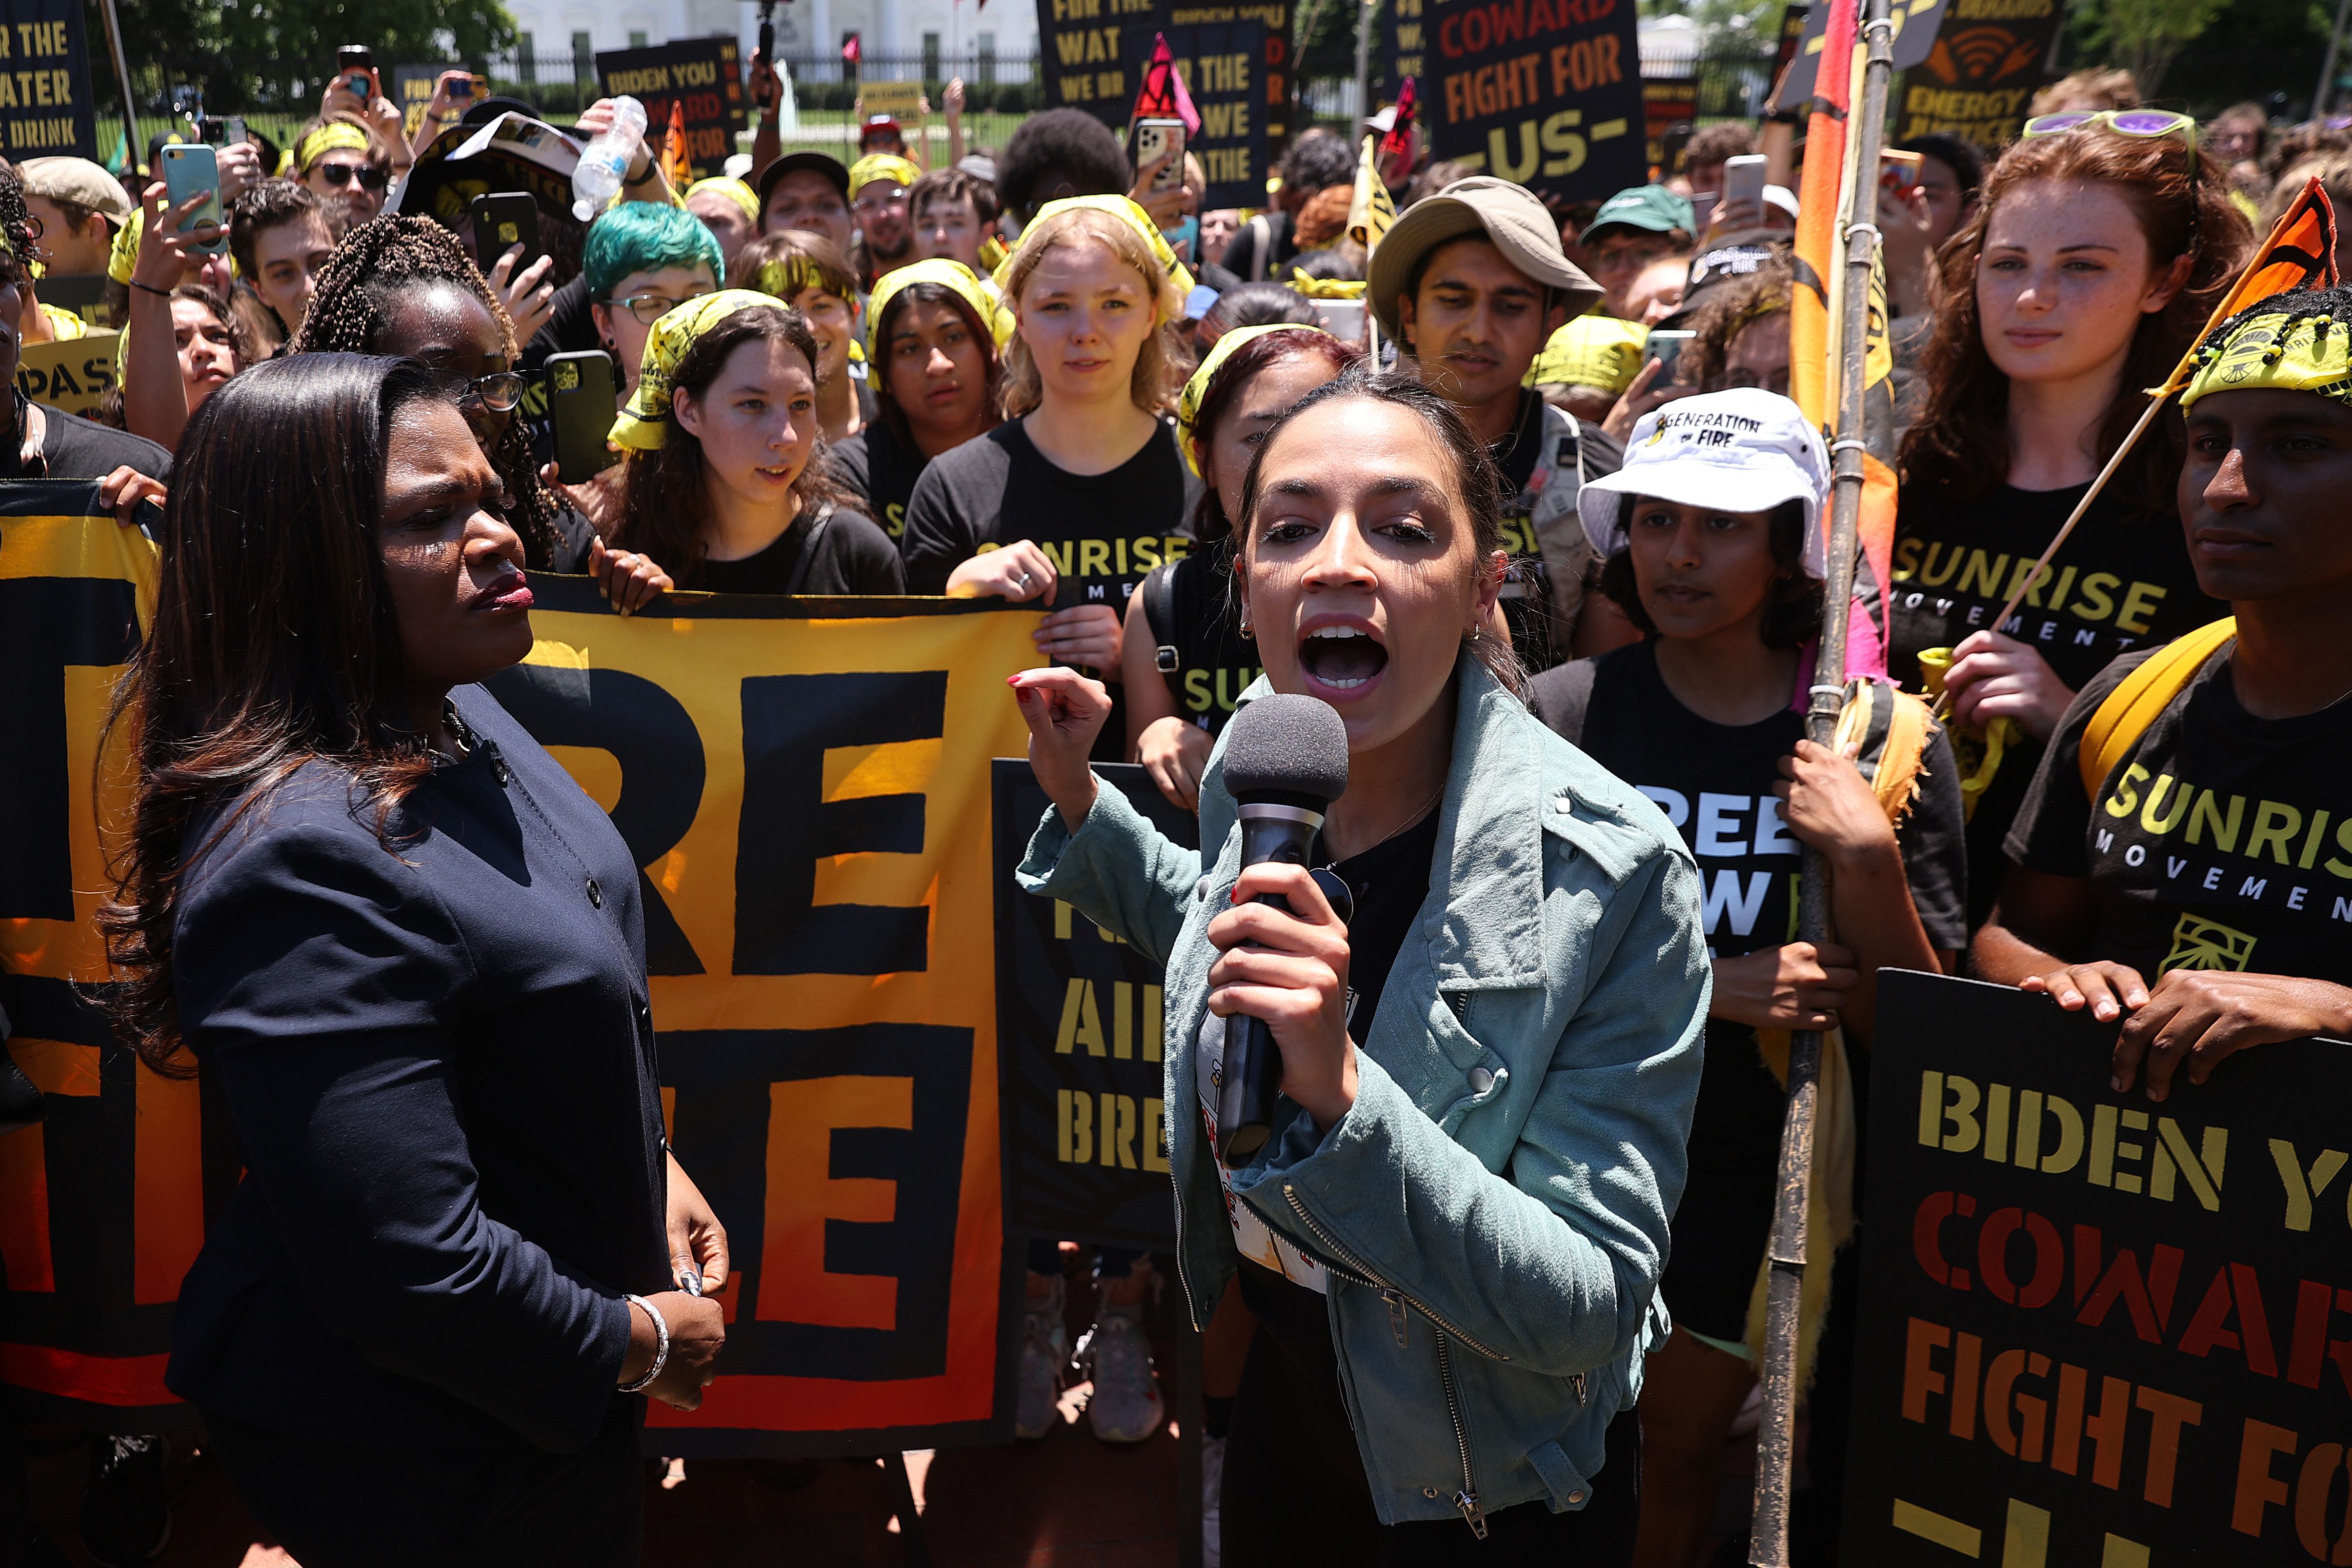 Reps. Cori Bush and Alexandria Ocasio-Cortez rallying hundreds of young climate activists in Lafayette Square on the north side of the White House